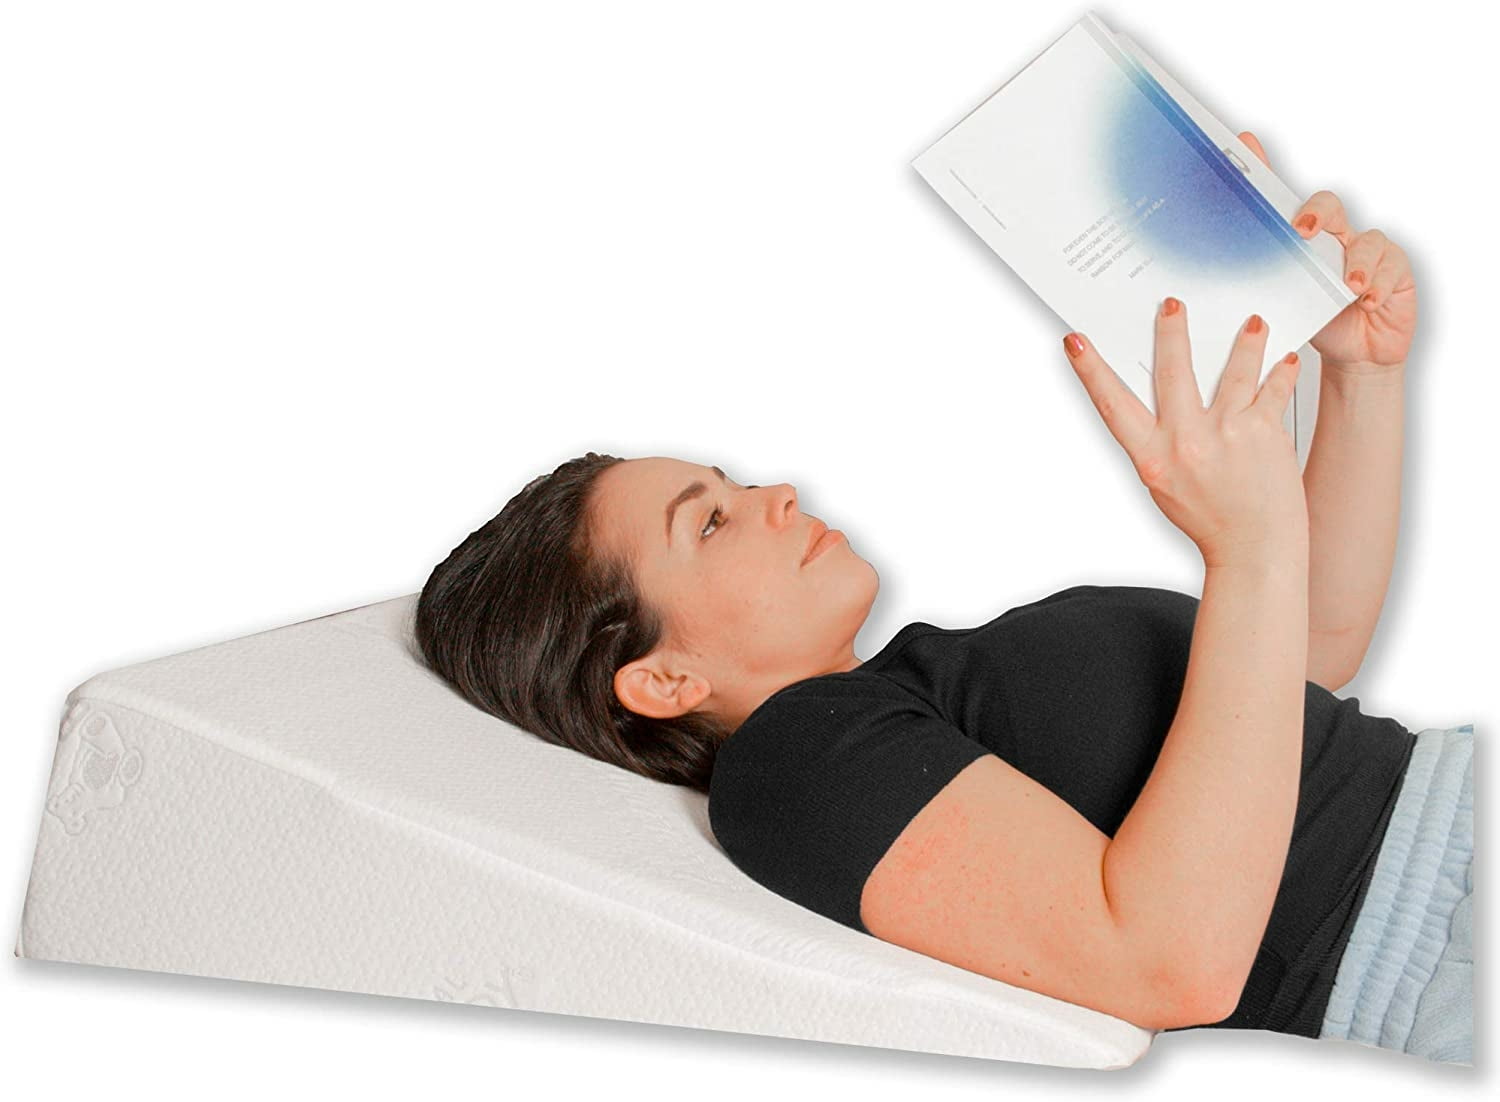 White with Blue Edge Memory Foam Leg Pillow with Polyester Cover Rest Sleeping 